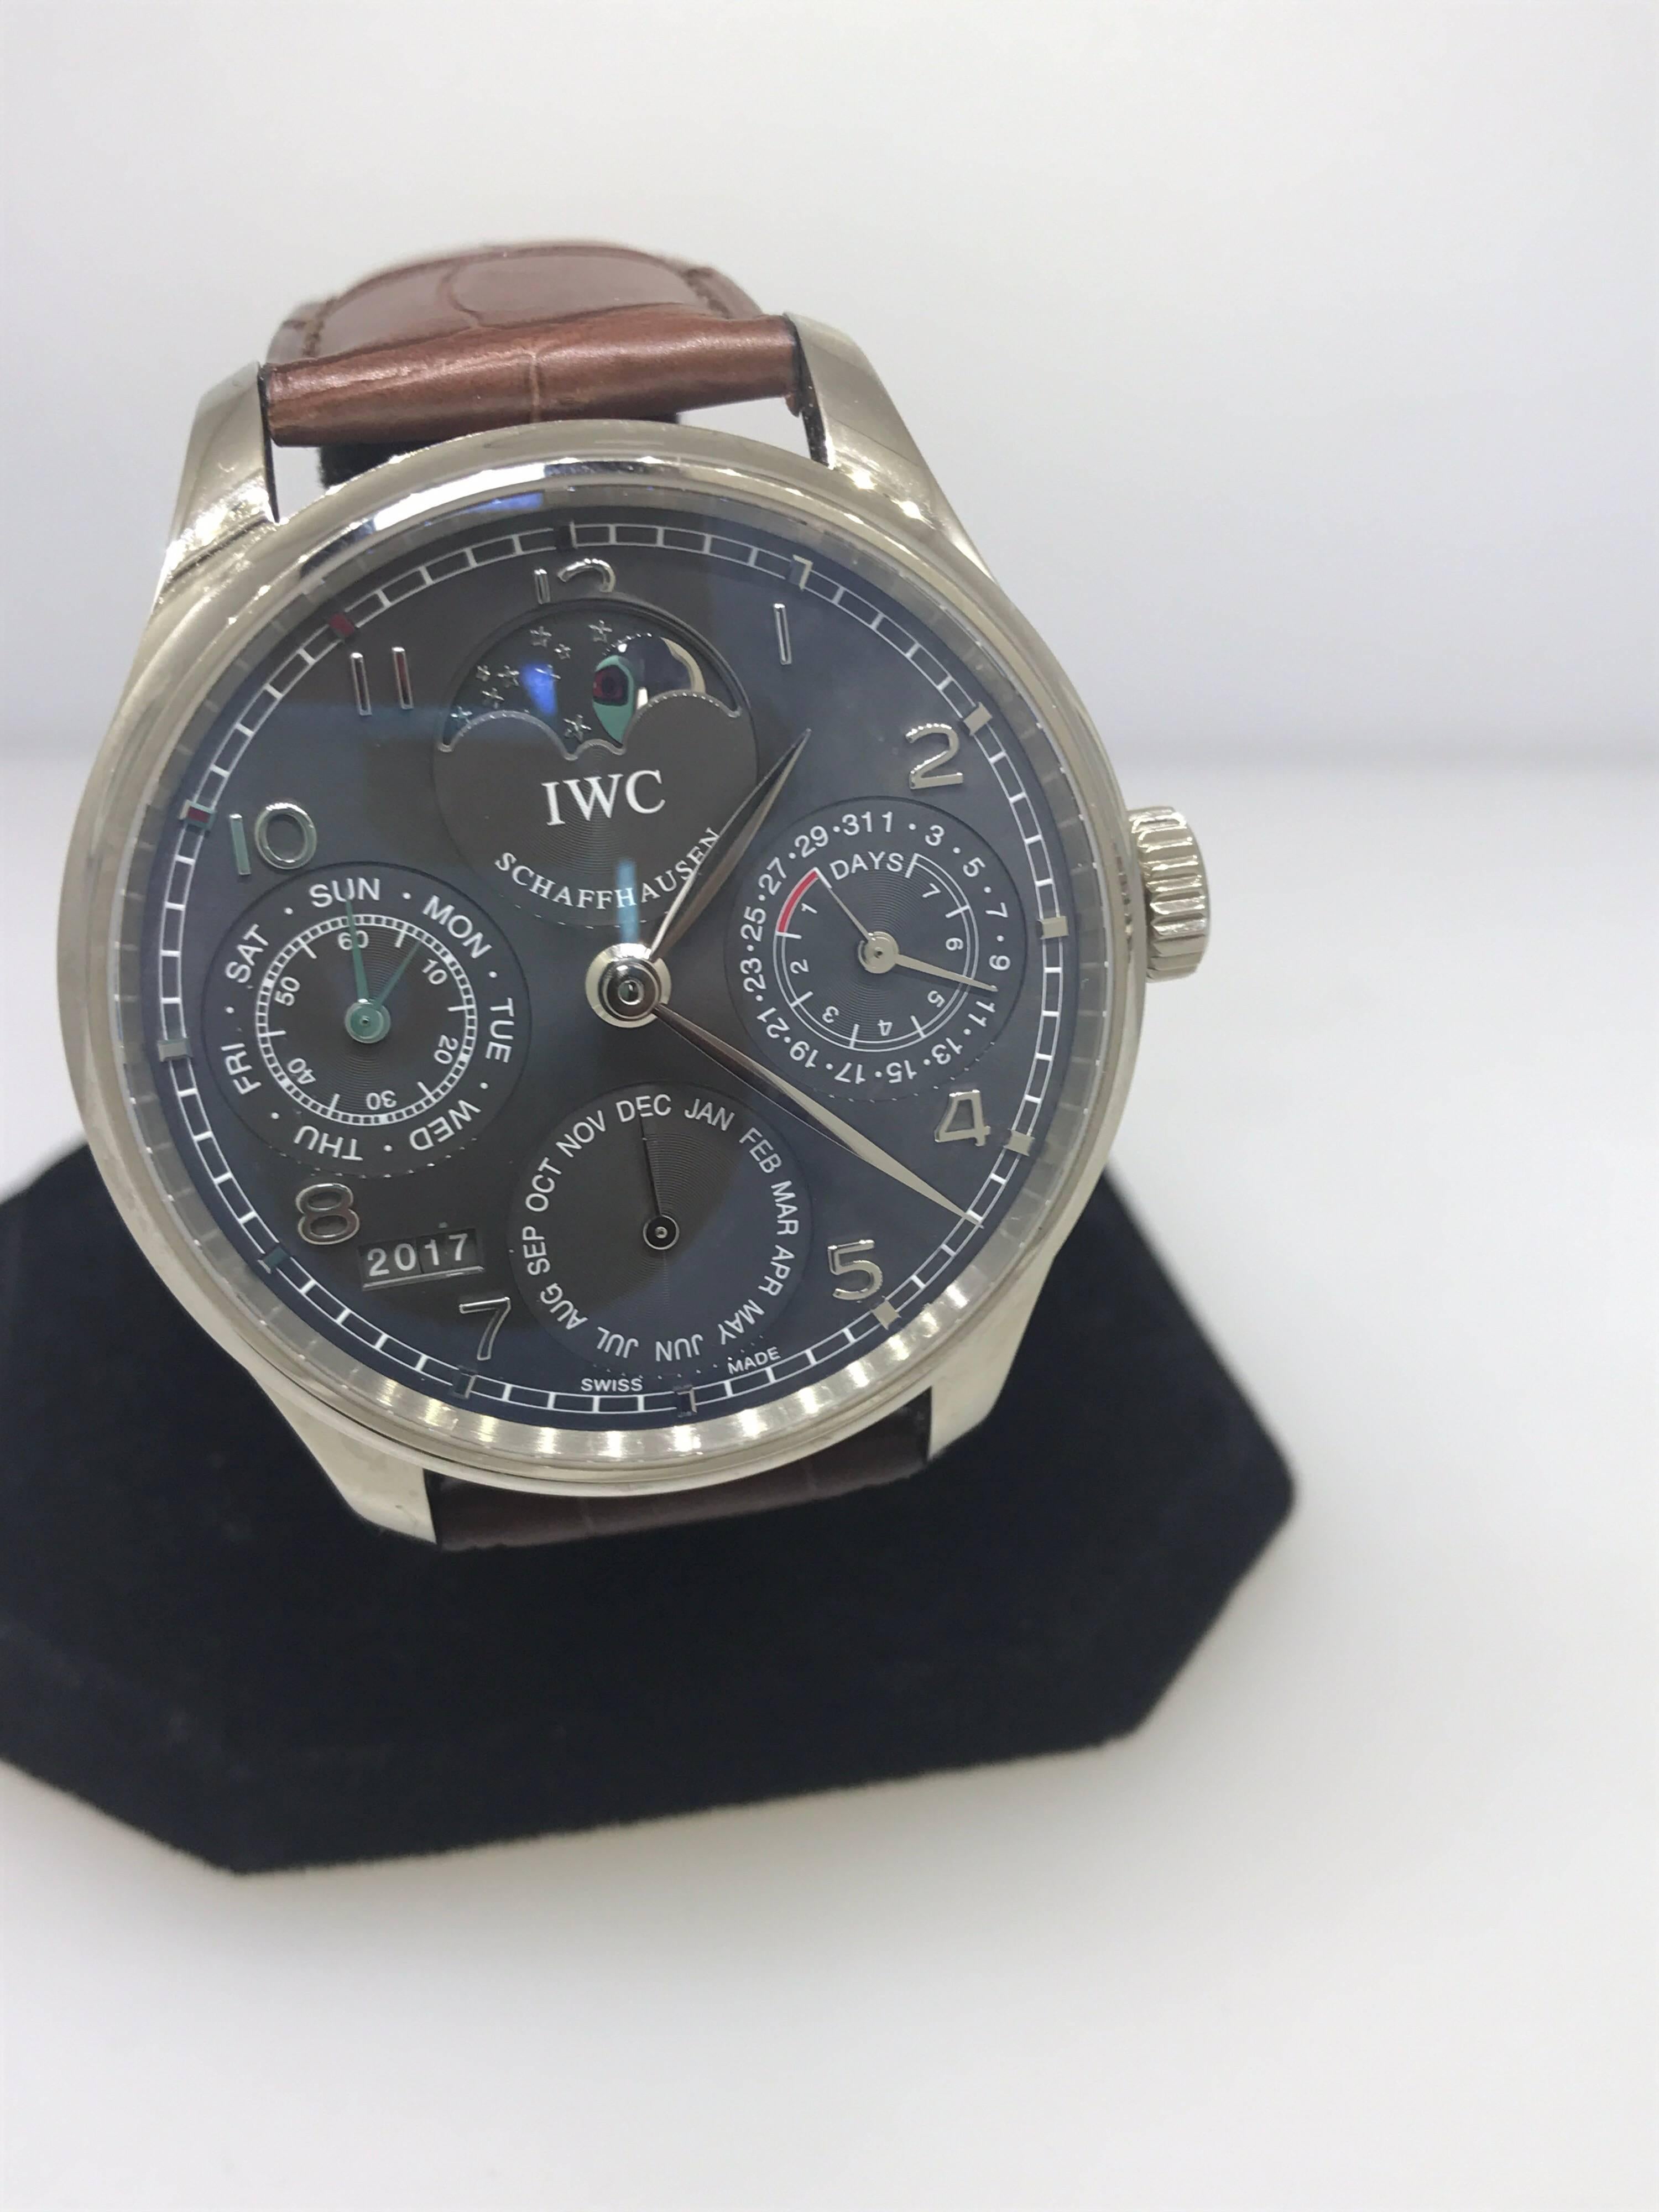 IWC Schaffhausen Portuguese Perpetual Calendar Men's Watch

Model Number: IW302507

100% Authentic 

New

Comes with original IWC Schaffhausen box, warranty card, and instruction manual

18 Karat White Gold Case & Buckle

See-through Case Back

Gray